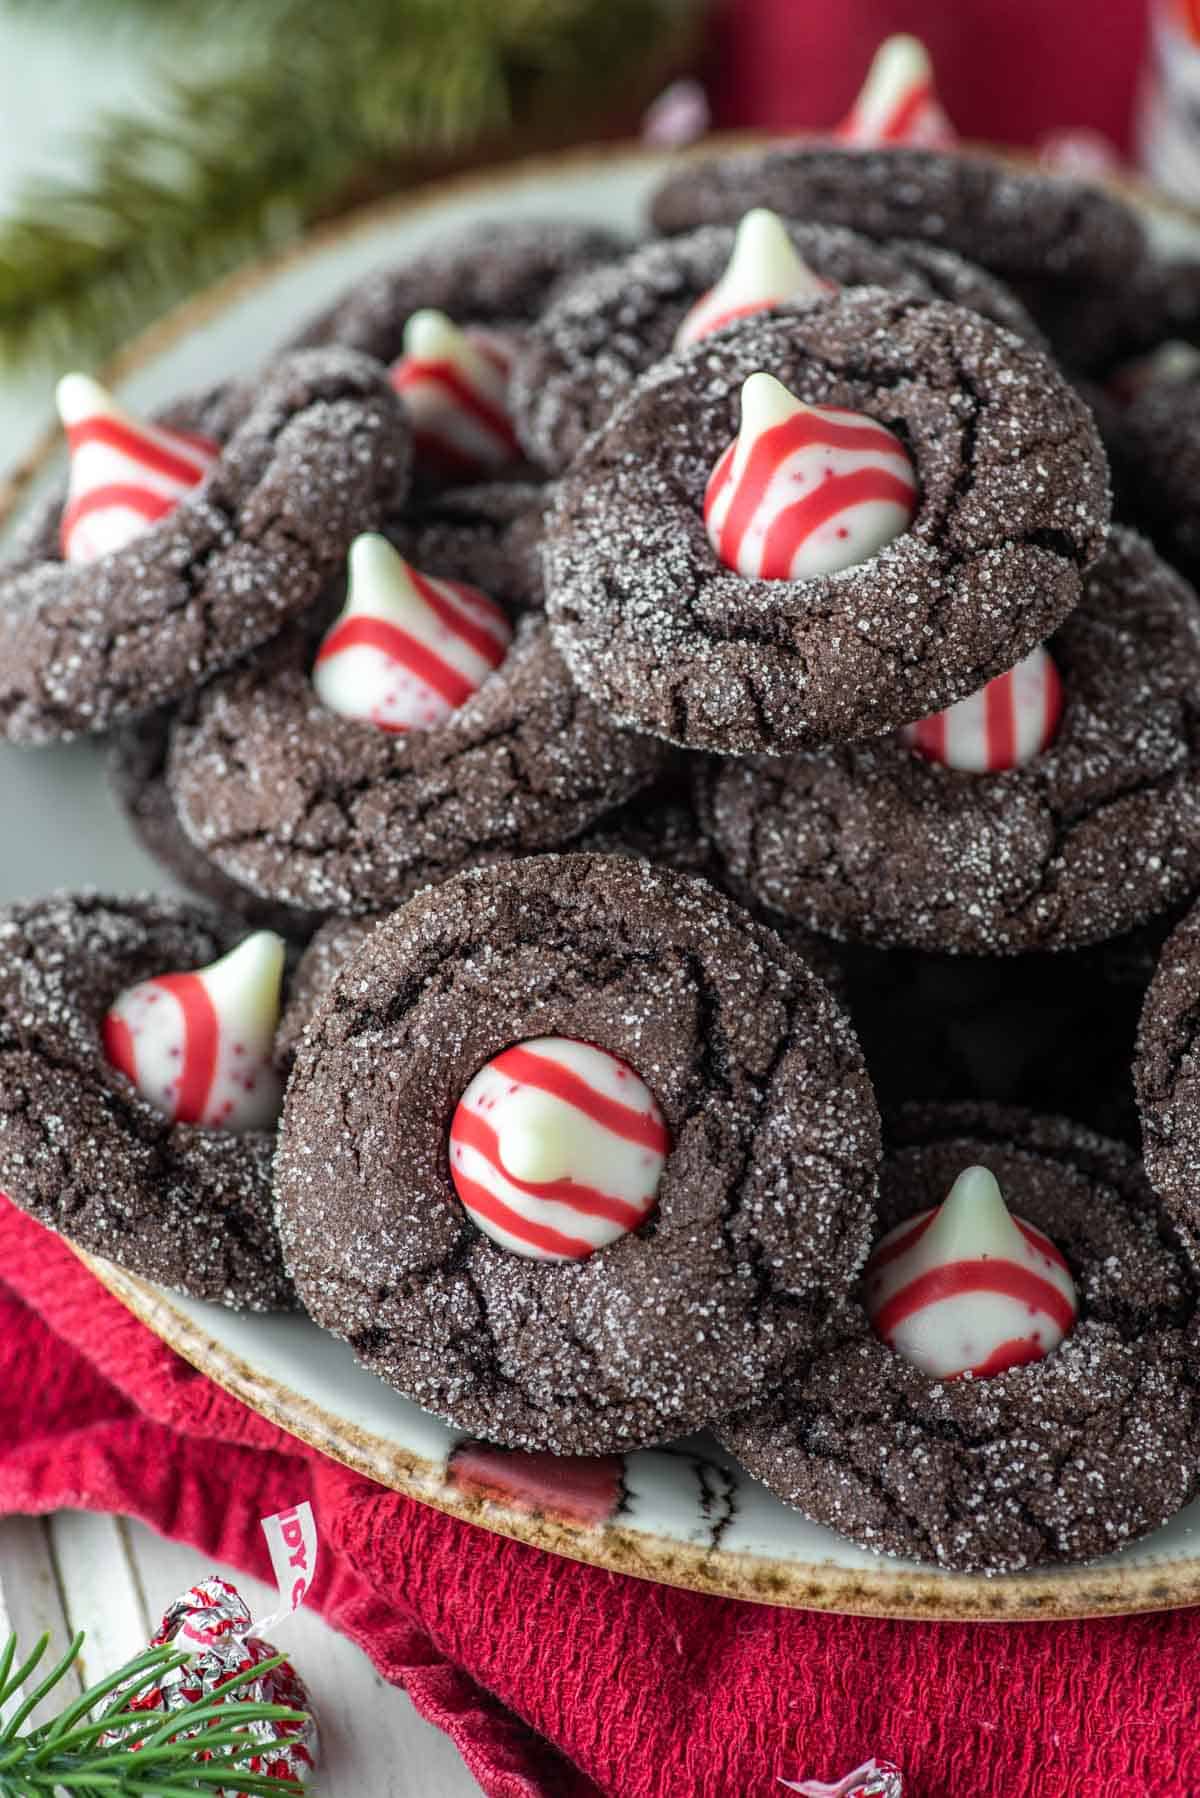 Chocolate Peppermint Blossoms - A Tasty Holiday Treat - Chisel & Fork